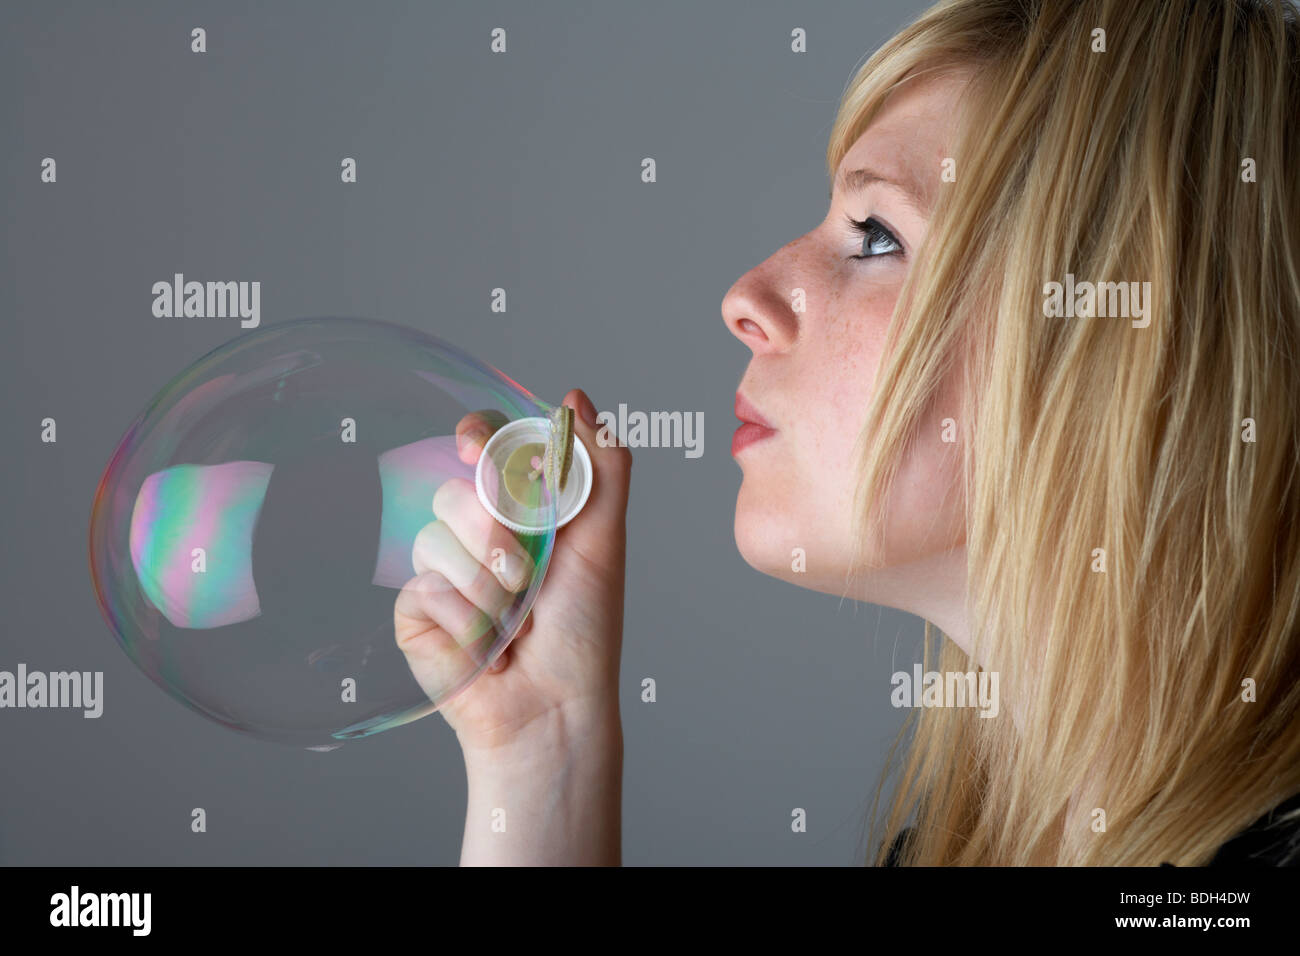 young 20 year old blonde woman blowing one large bubble from a childs toy Stock Photo